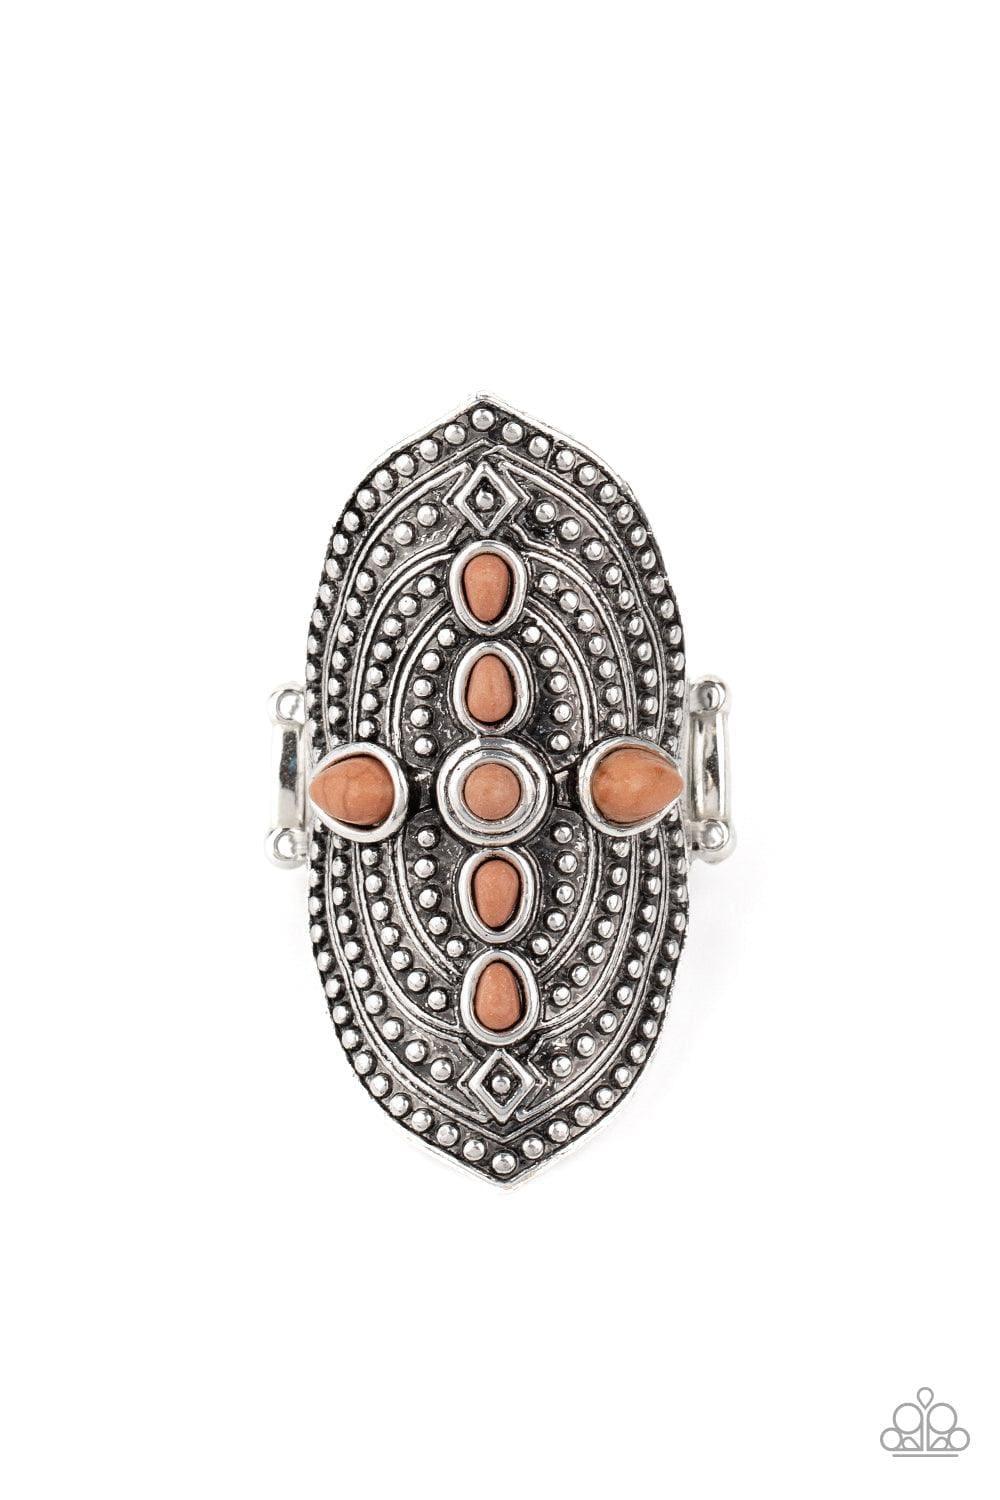 Paparazzi Accessories - Shield In Place - Brown Ring - Bling by JessieK